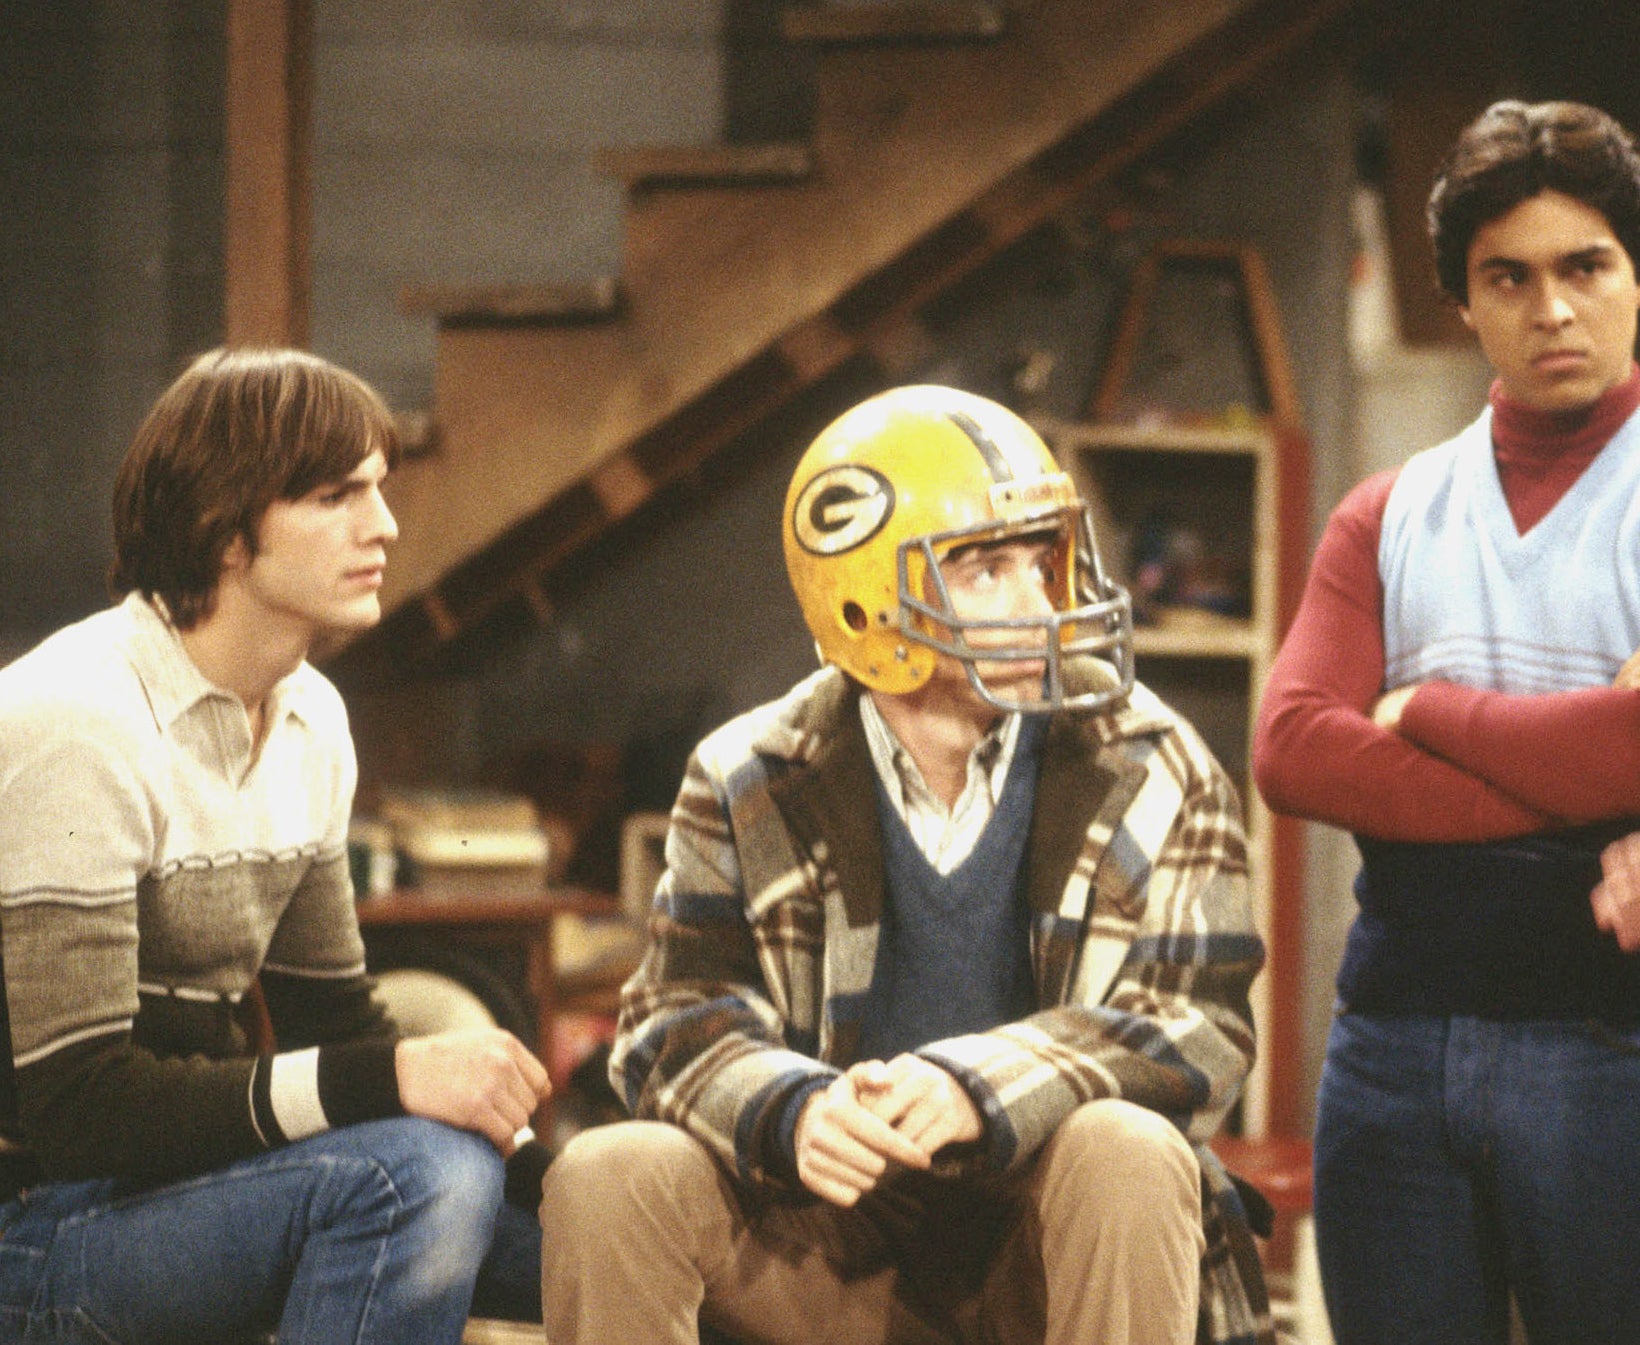 Kelso, Eric, and Fez in a basement